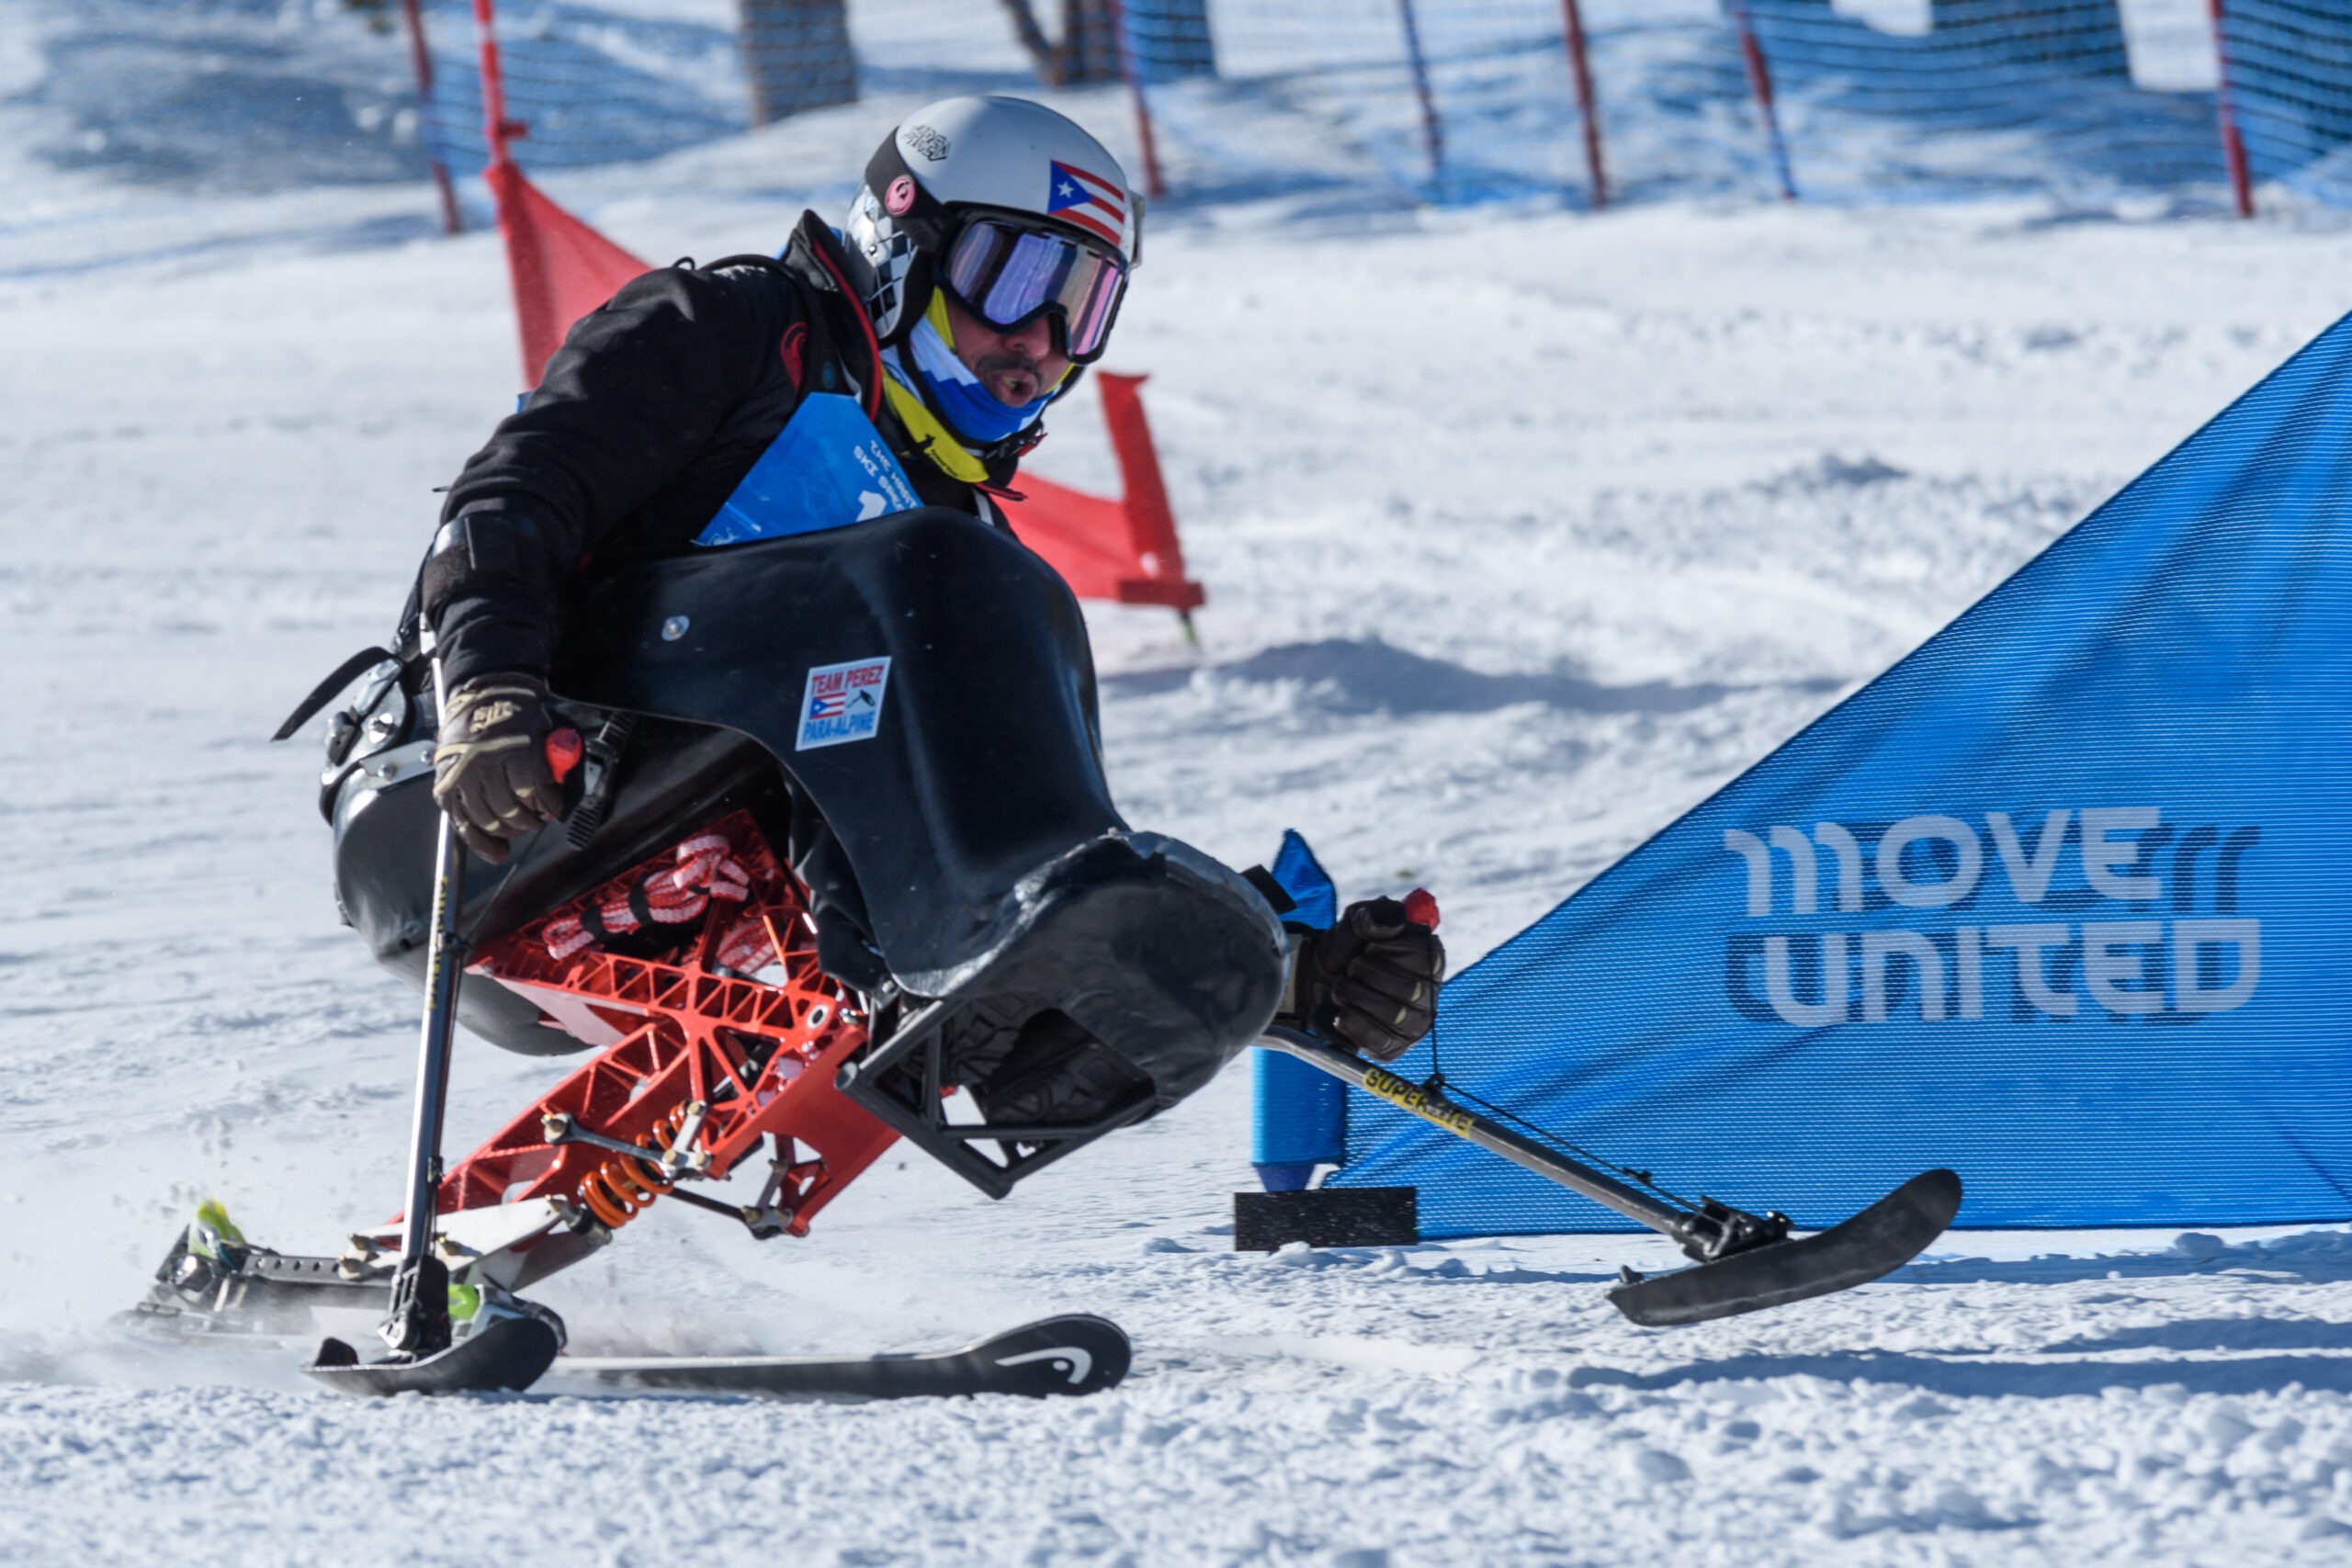 U.S. Paralympians, Wounded Warriors To Join The Hartford Ski